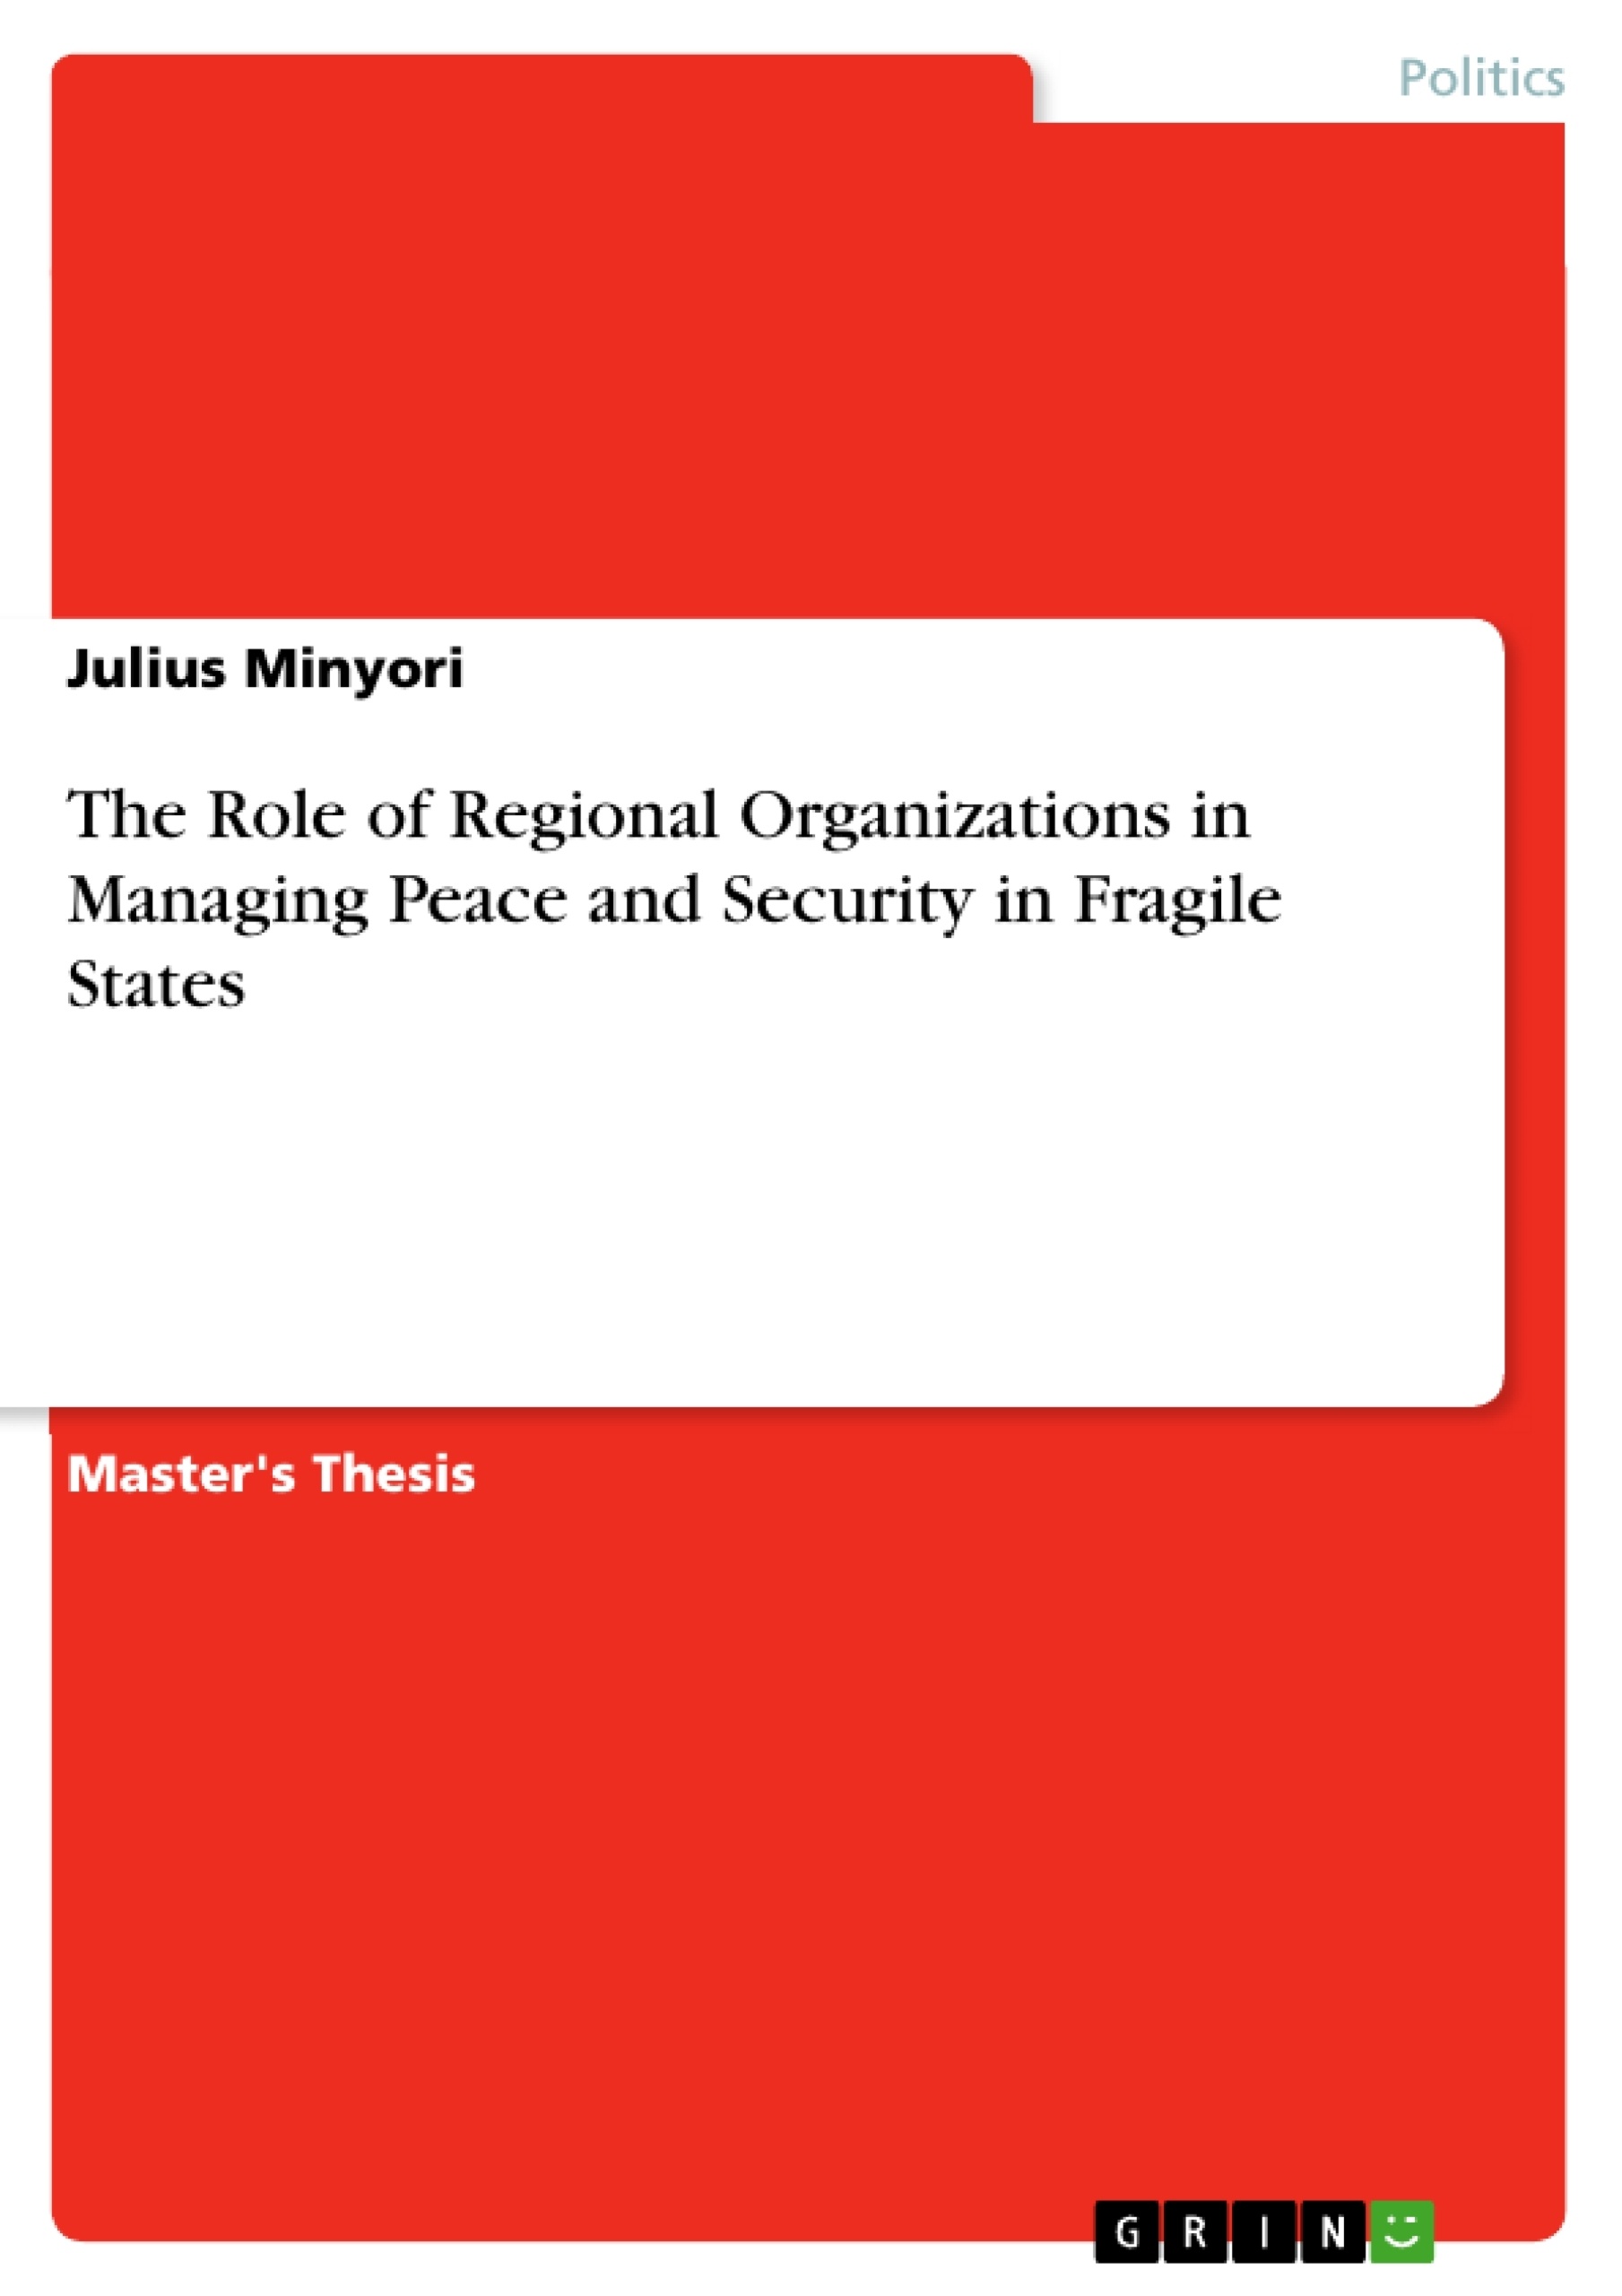 Title: The Role of Regional Organizations in Managing Peace and Security in Fragile States